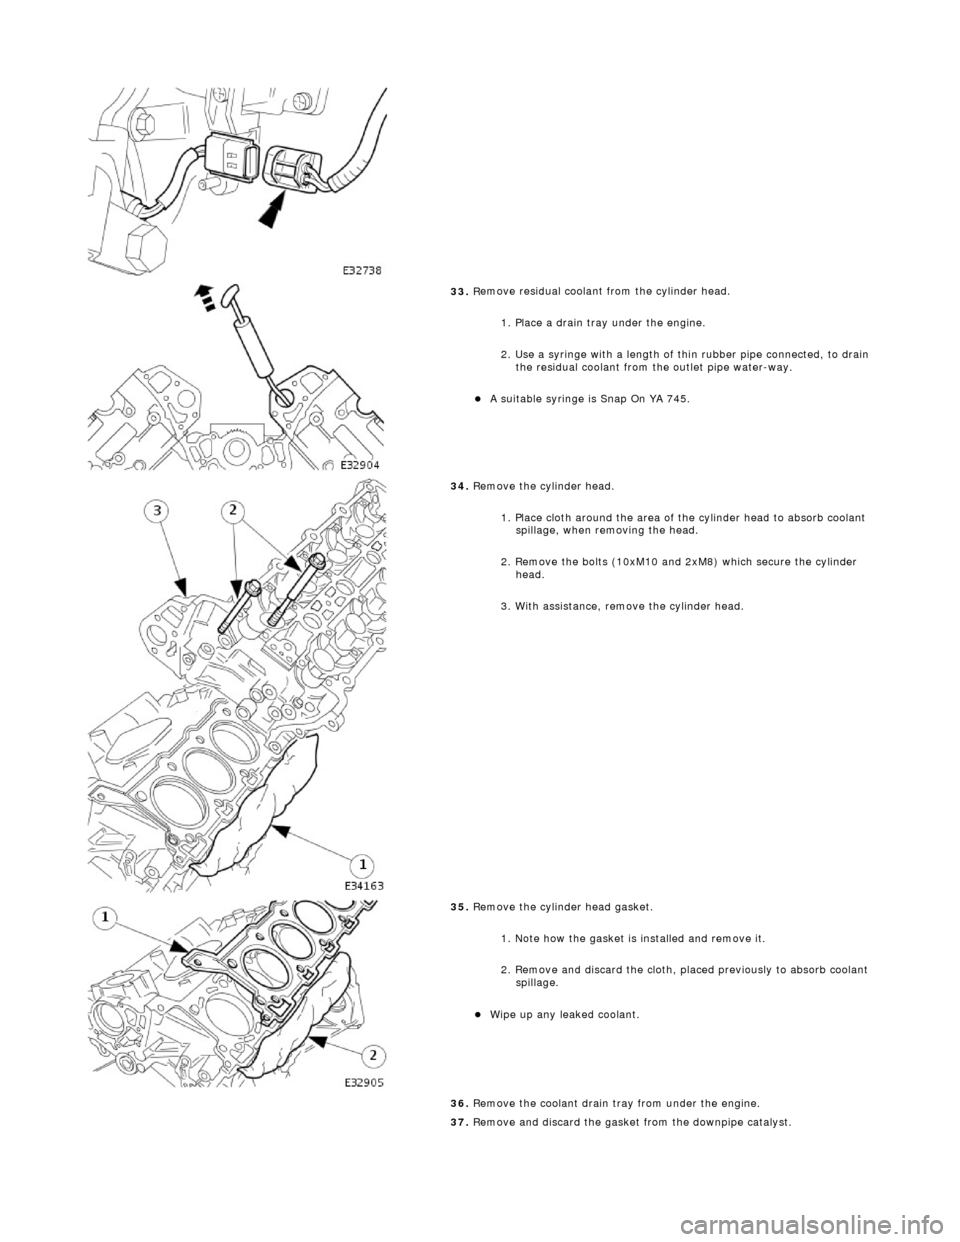 JAGUAR X308 1998 2.G Workshop Manual  
 
33. R
 emove residual coolant from the cylinder head. 
1. Place a drain tray under the engine. 
2. Use a syringe with a length of thin rubber pipe connected, to drain the residual coolant from the